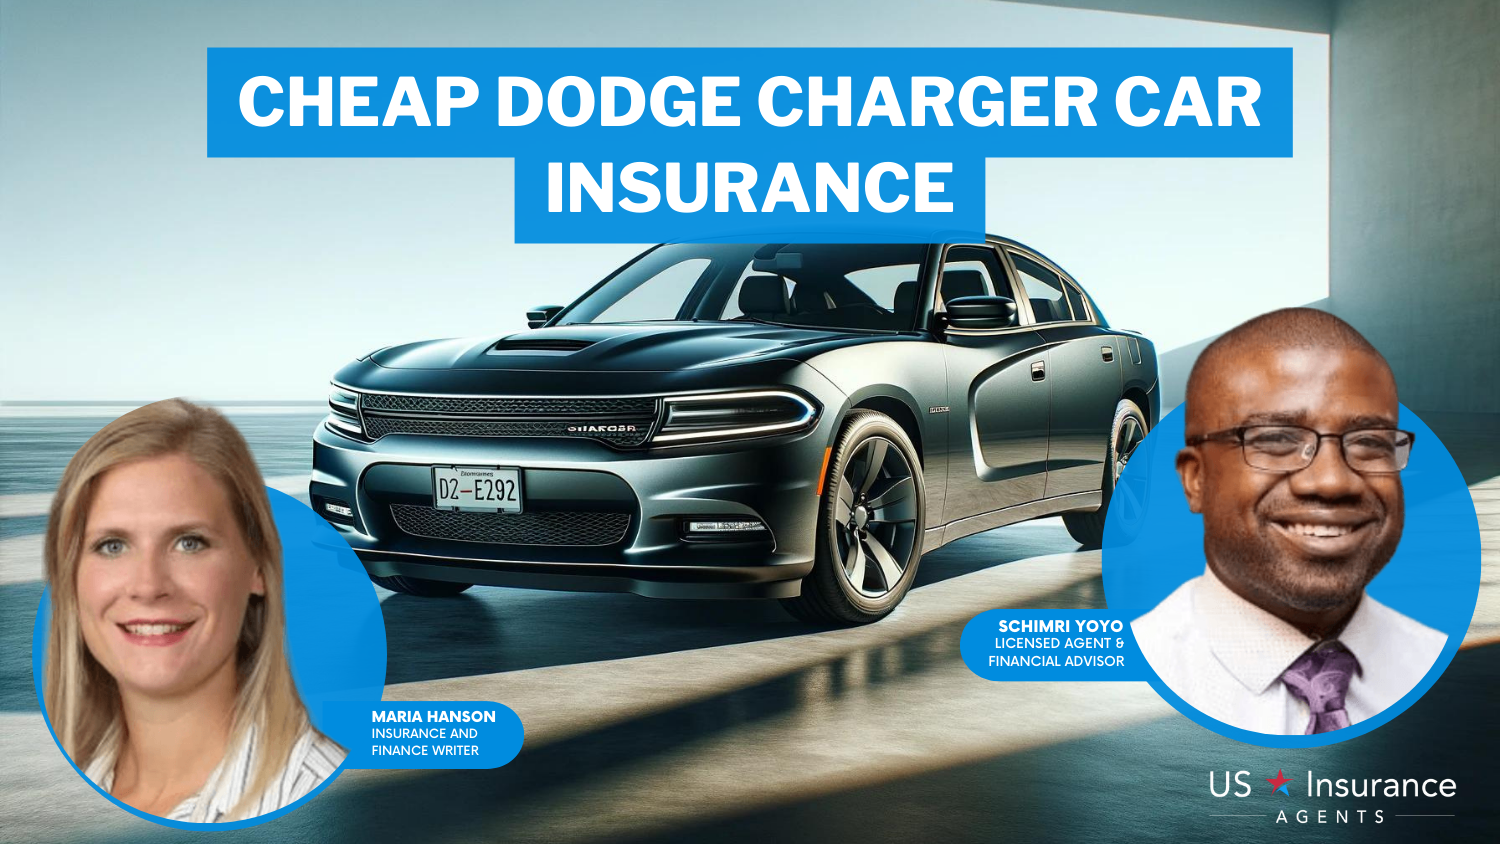 Cheap Dodge Charger Car Insurance: Erie, Progressive, and Safeco